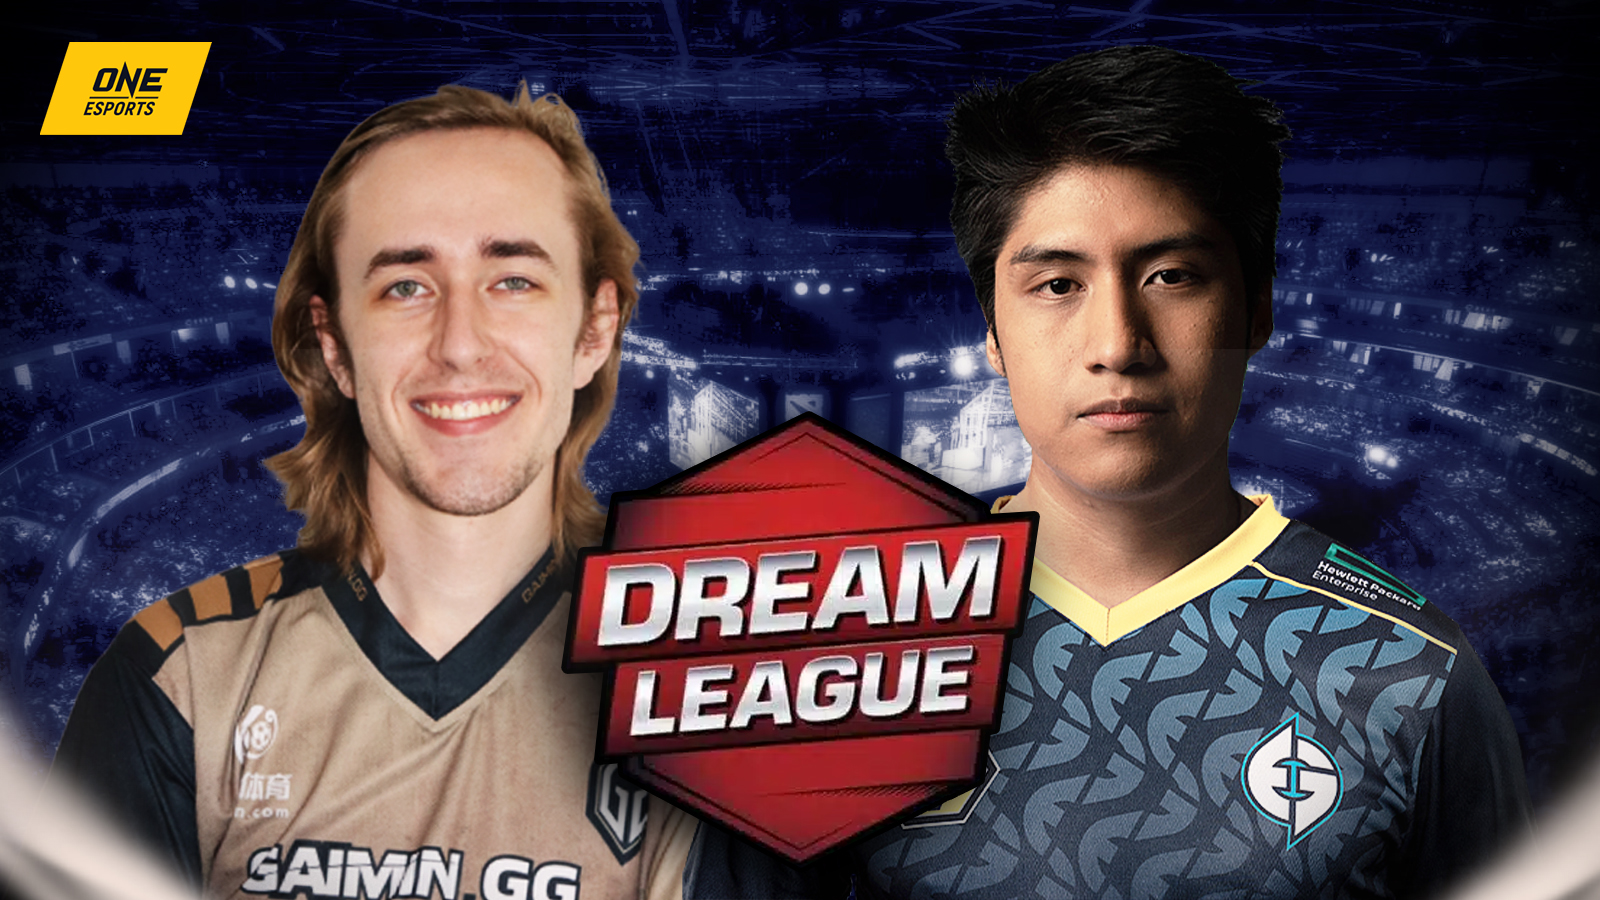 DreamLeague: Eliminations and Upcoming Tie-breakers